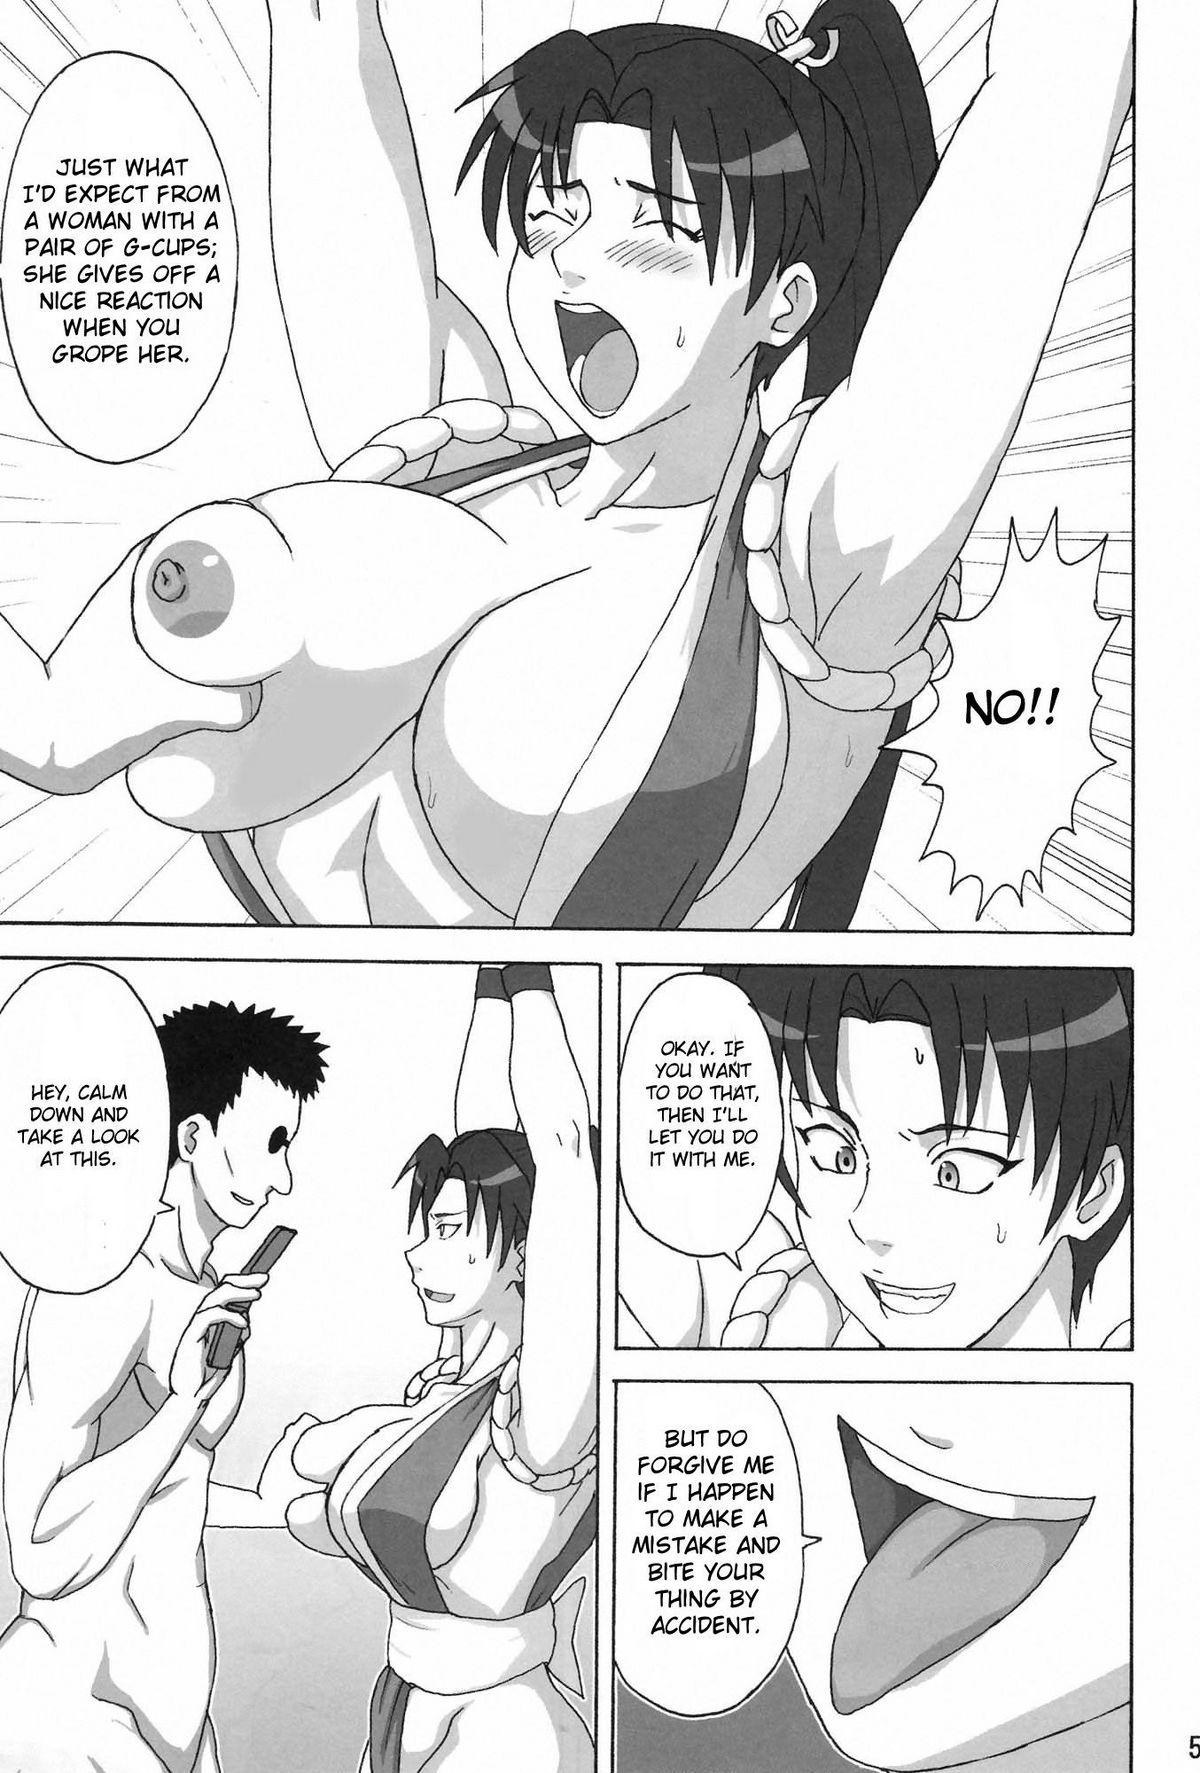 Dance Mai x 3 - King of fighters Fatal fury Audition - Page 6